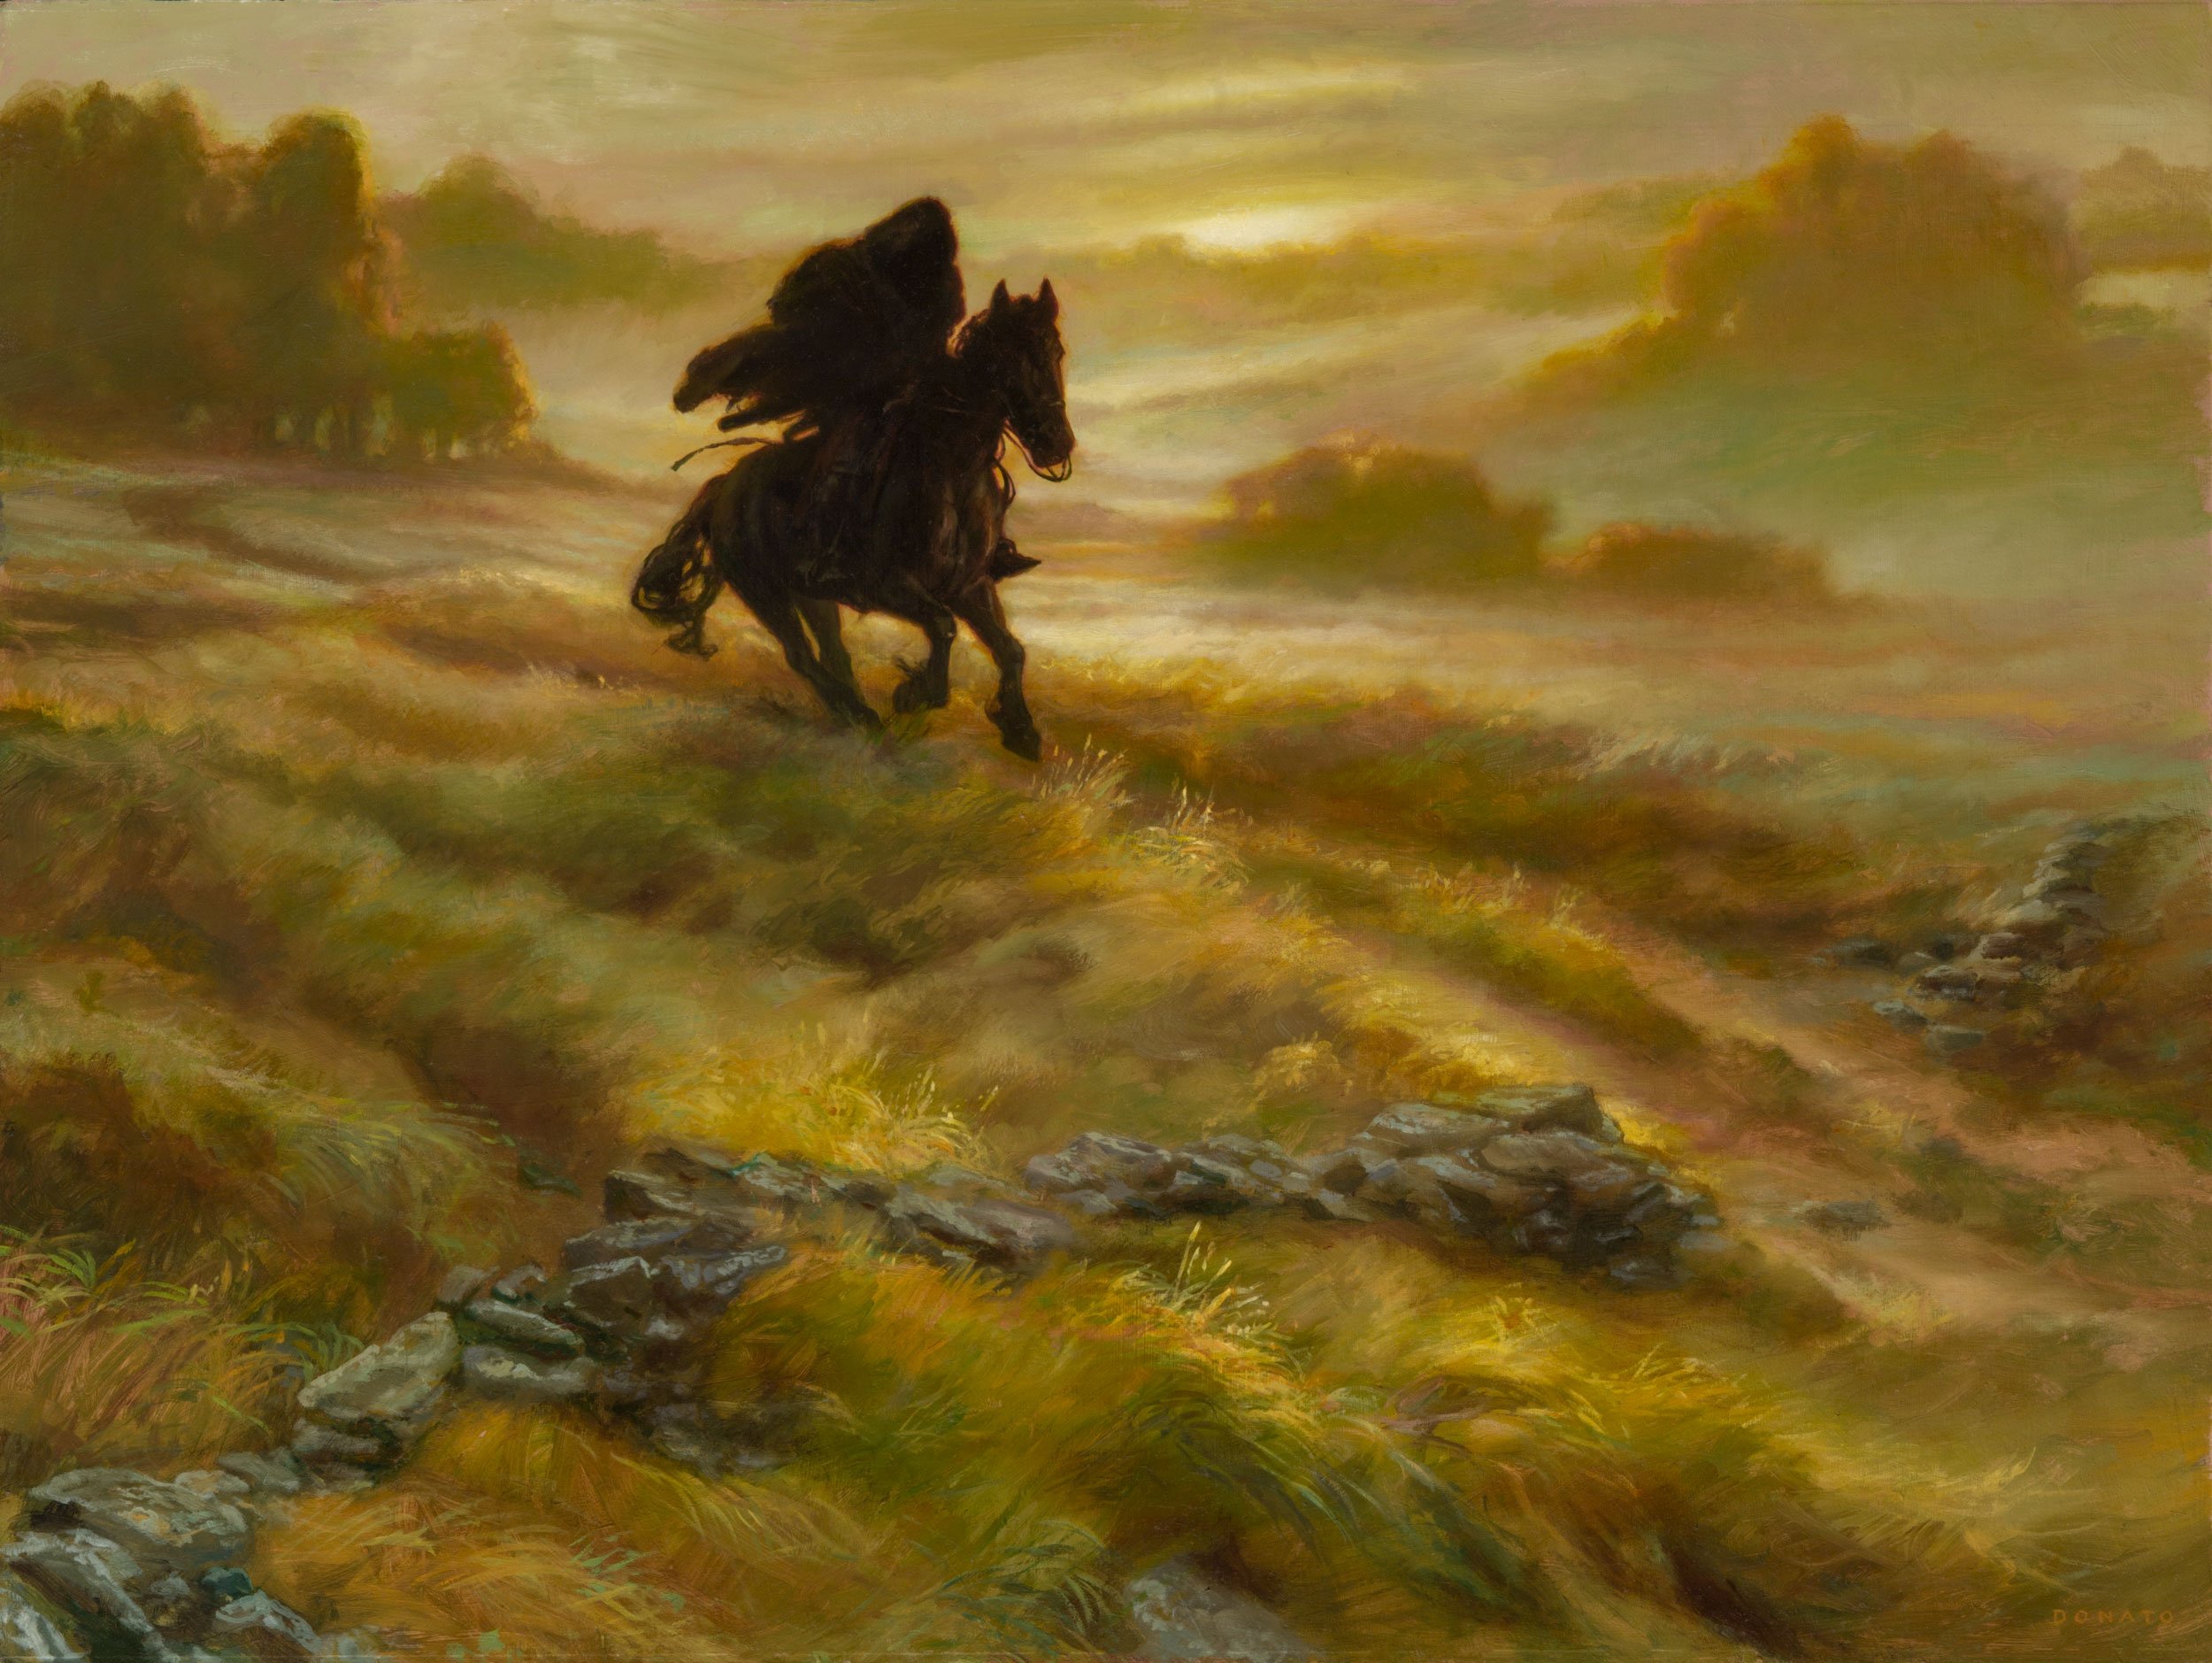 Searching for Baggins
18" x 24"  Oil on Panel  2021
private collection
